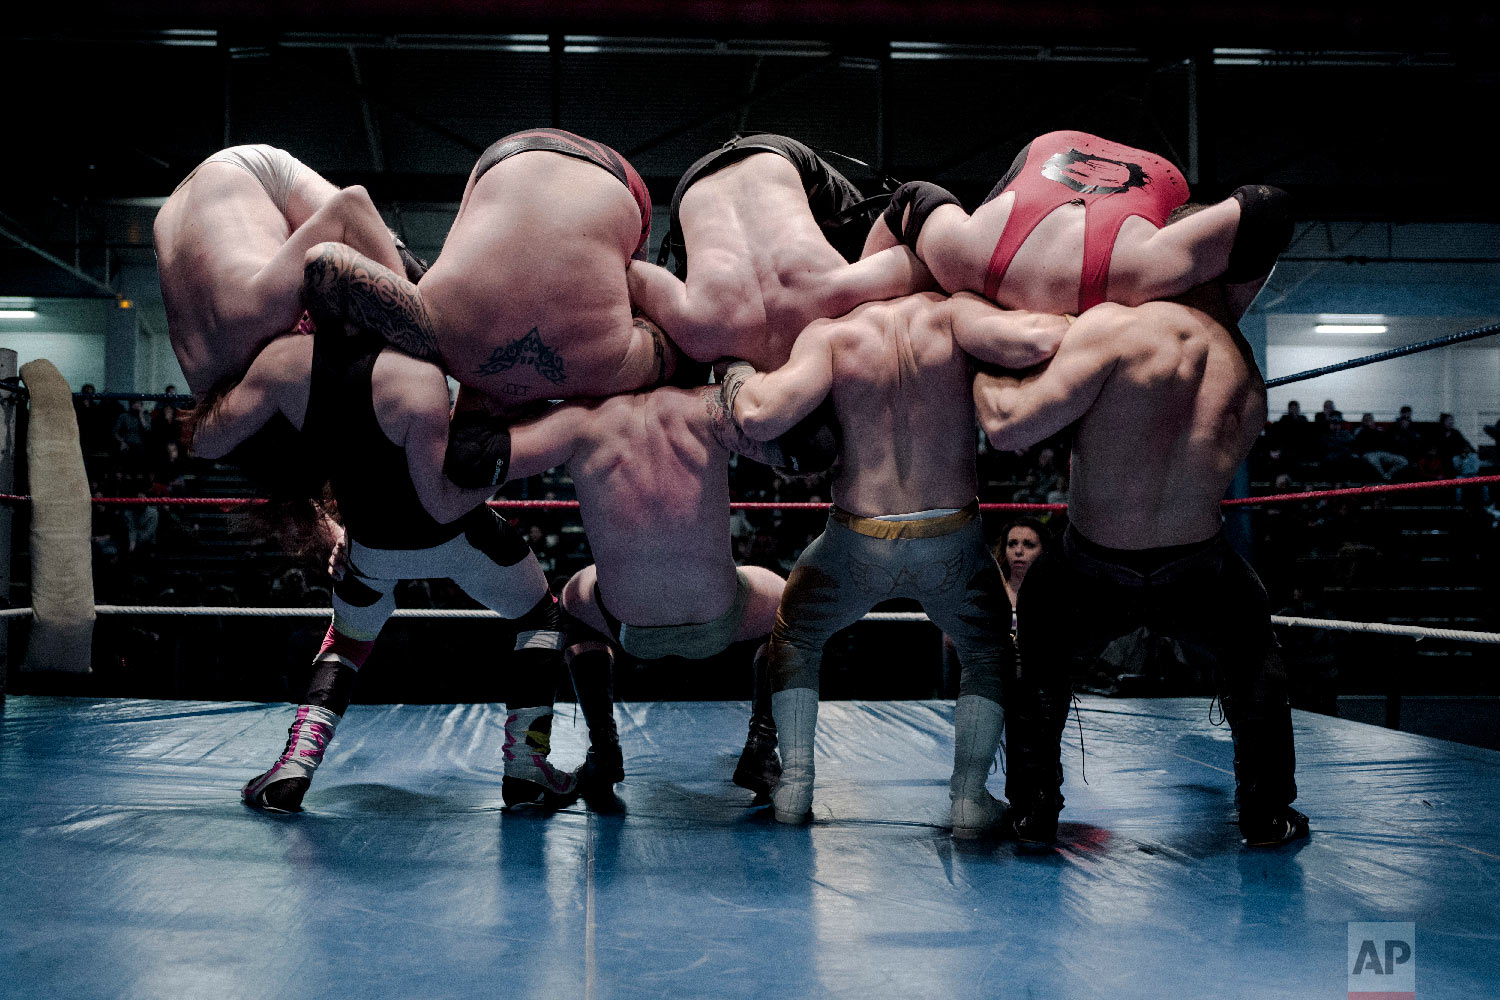  From left, wrestlers Nelson Fernandes, Alex Legrand, Ace Angel, and Zach, bottom, headlock wrestlers Lord Steven Crowley, Darkmundo, Maeven, and PV Red, fight during a wrestling charity gala in Ivry-sur-Seine, south of Paris, France on Feb. 24, 2018